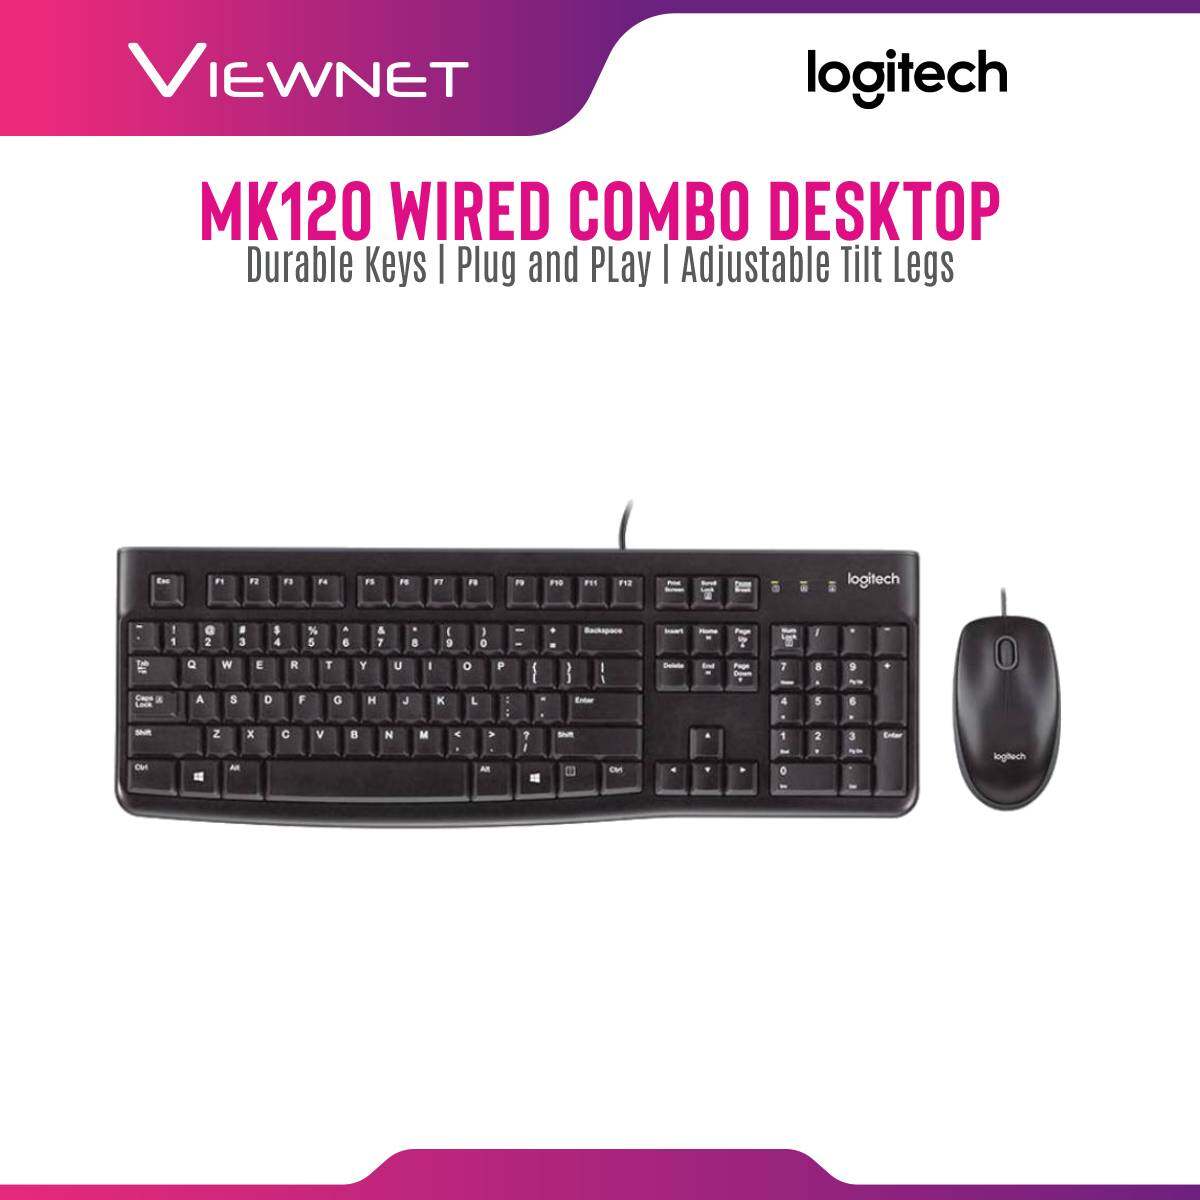 Logitech MK120 USB Keyboard & Mouse Combo with quiet typing, Durable keys, Plug-and-play USB connections